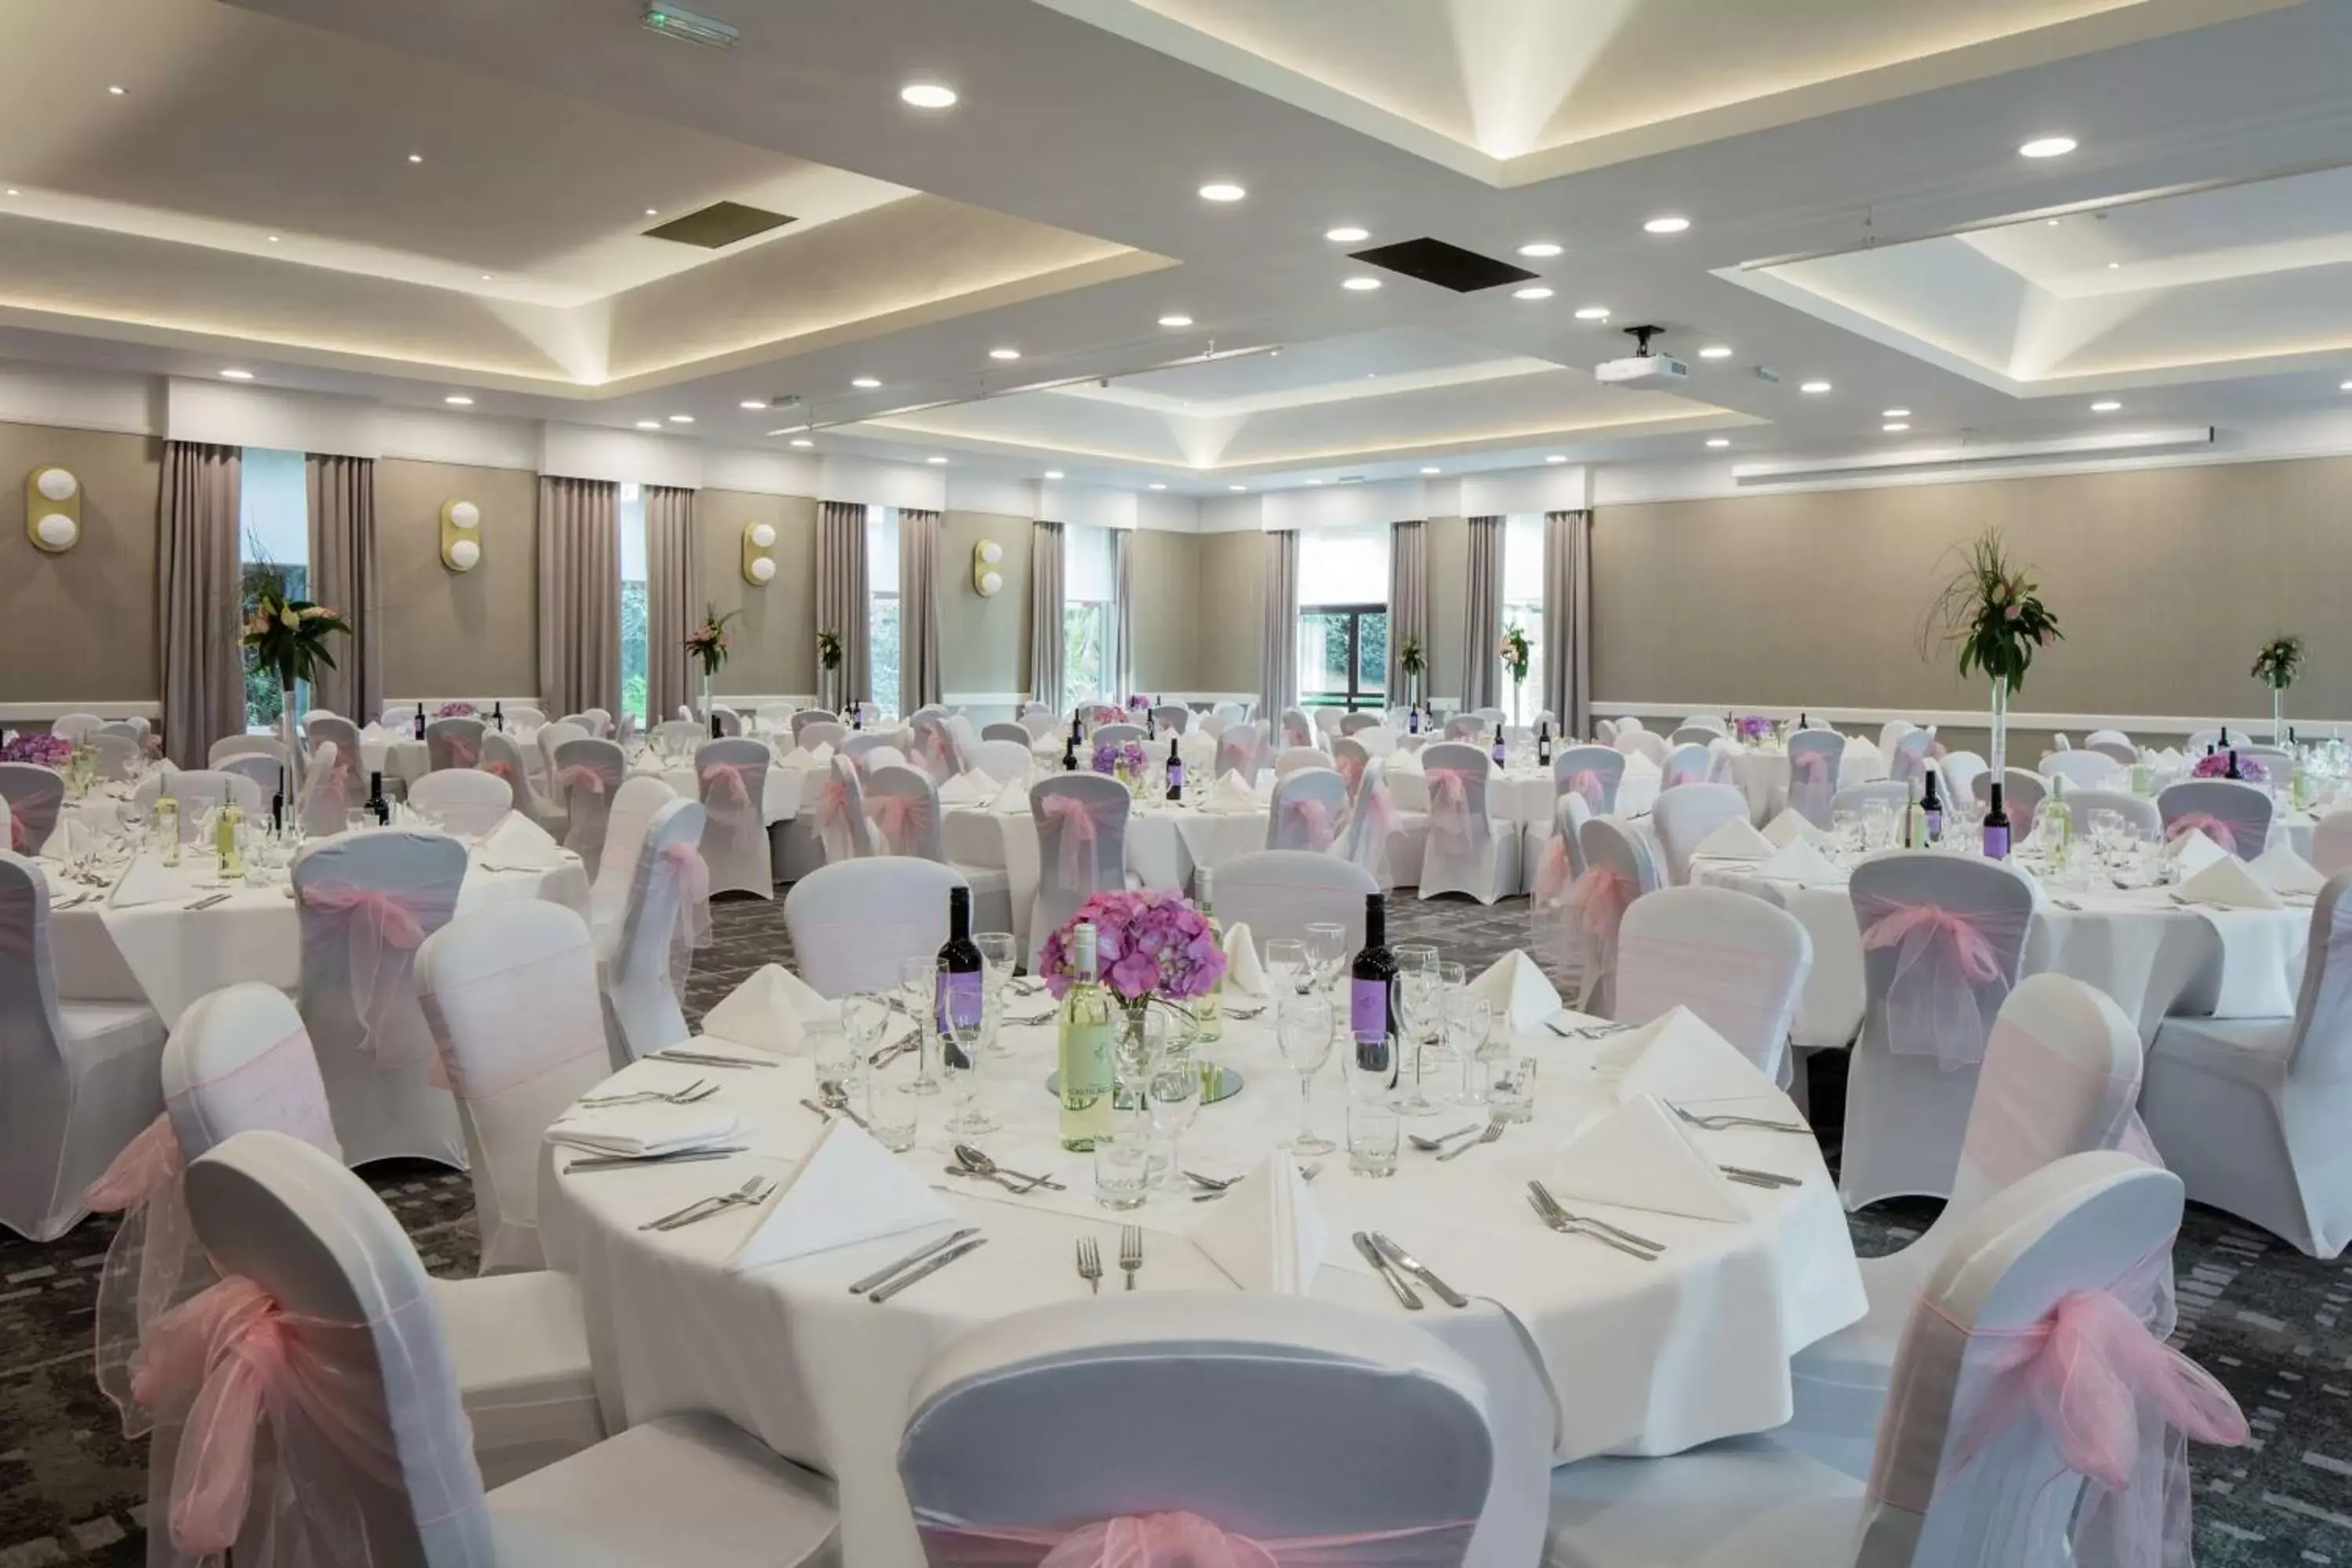 Meeting/conference room, Banquet Facilities in Hilton London Watford